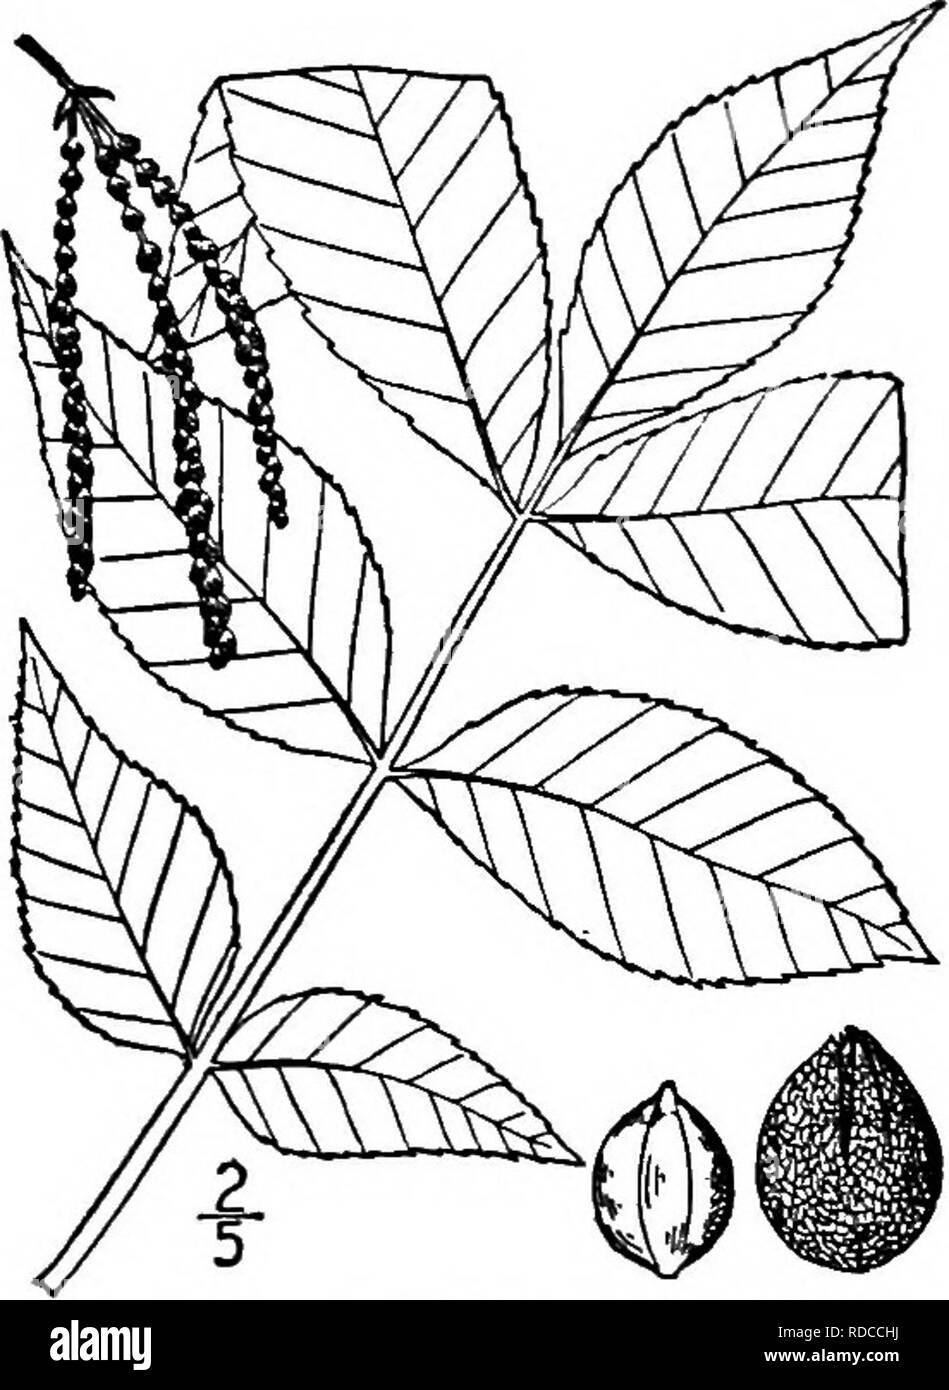 . North American trees : being descriptions and illustrations of the trees growing independently of cultivation in North America, north of Mexico and the West Indies . Trees. 236 The Hickories for a few light-colored warts, dark brown or gray. The terminal bud is ovoid, blunt, about 15 mm. long, its scales 6 to 8, imbricated, the outer reddish brown and leathery, the inner hairy and continue to grow when the leaf expands, becoming 2.5 to 3.5 cm. in length. The leaves are 2 to 3 dm. long; leaf- stalk stout and channeled; leaflets 5 to 7, oval, ob- long or ovate, 6 to 14 cm. long, narrowed or ro Stock Photo